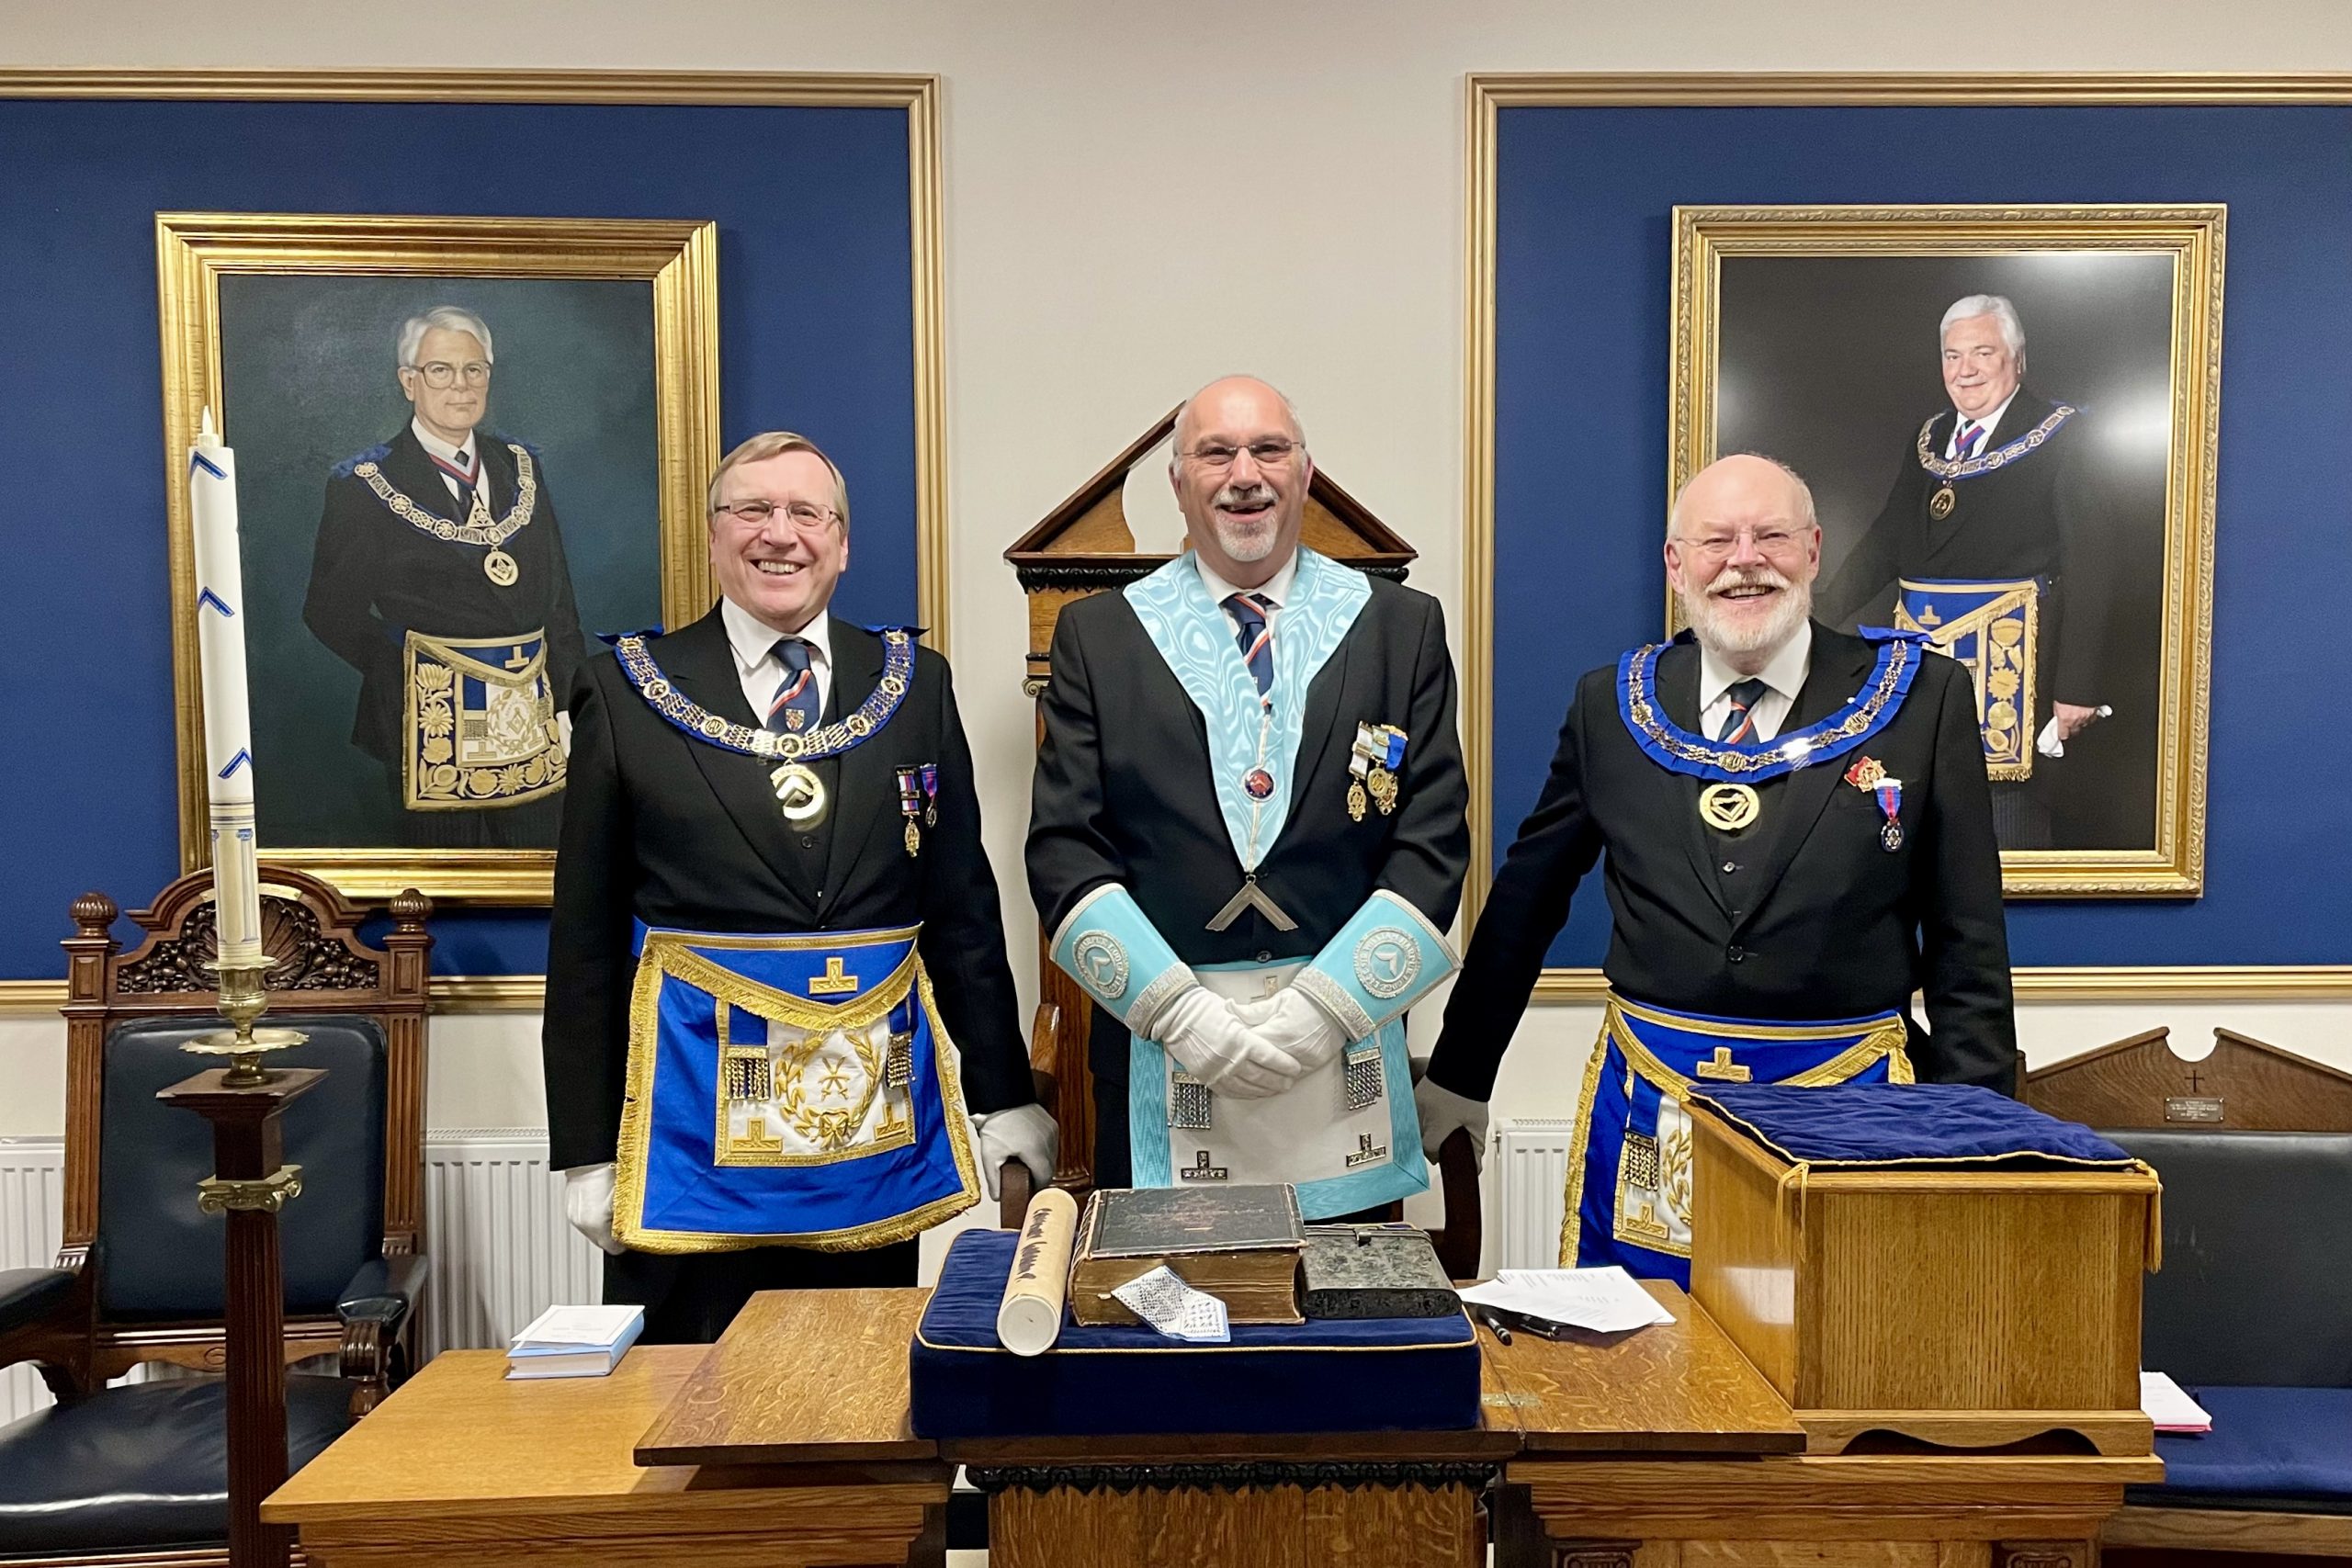 Double Delight for Sir William Harpur Lodge